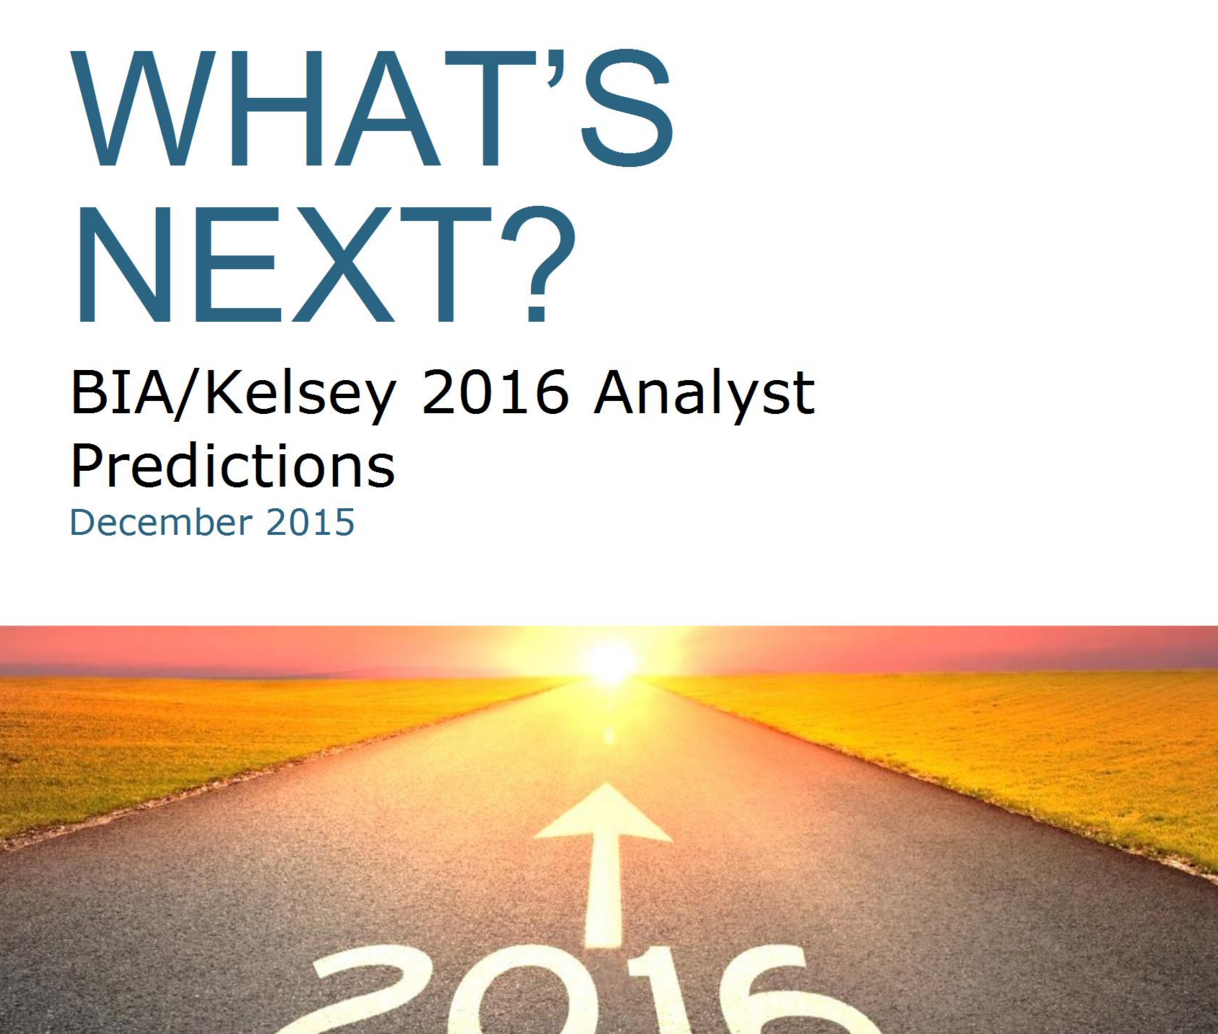 From Mobile To Millennials: 2016 Analyst Predictions (video)